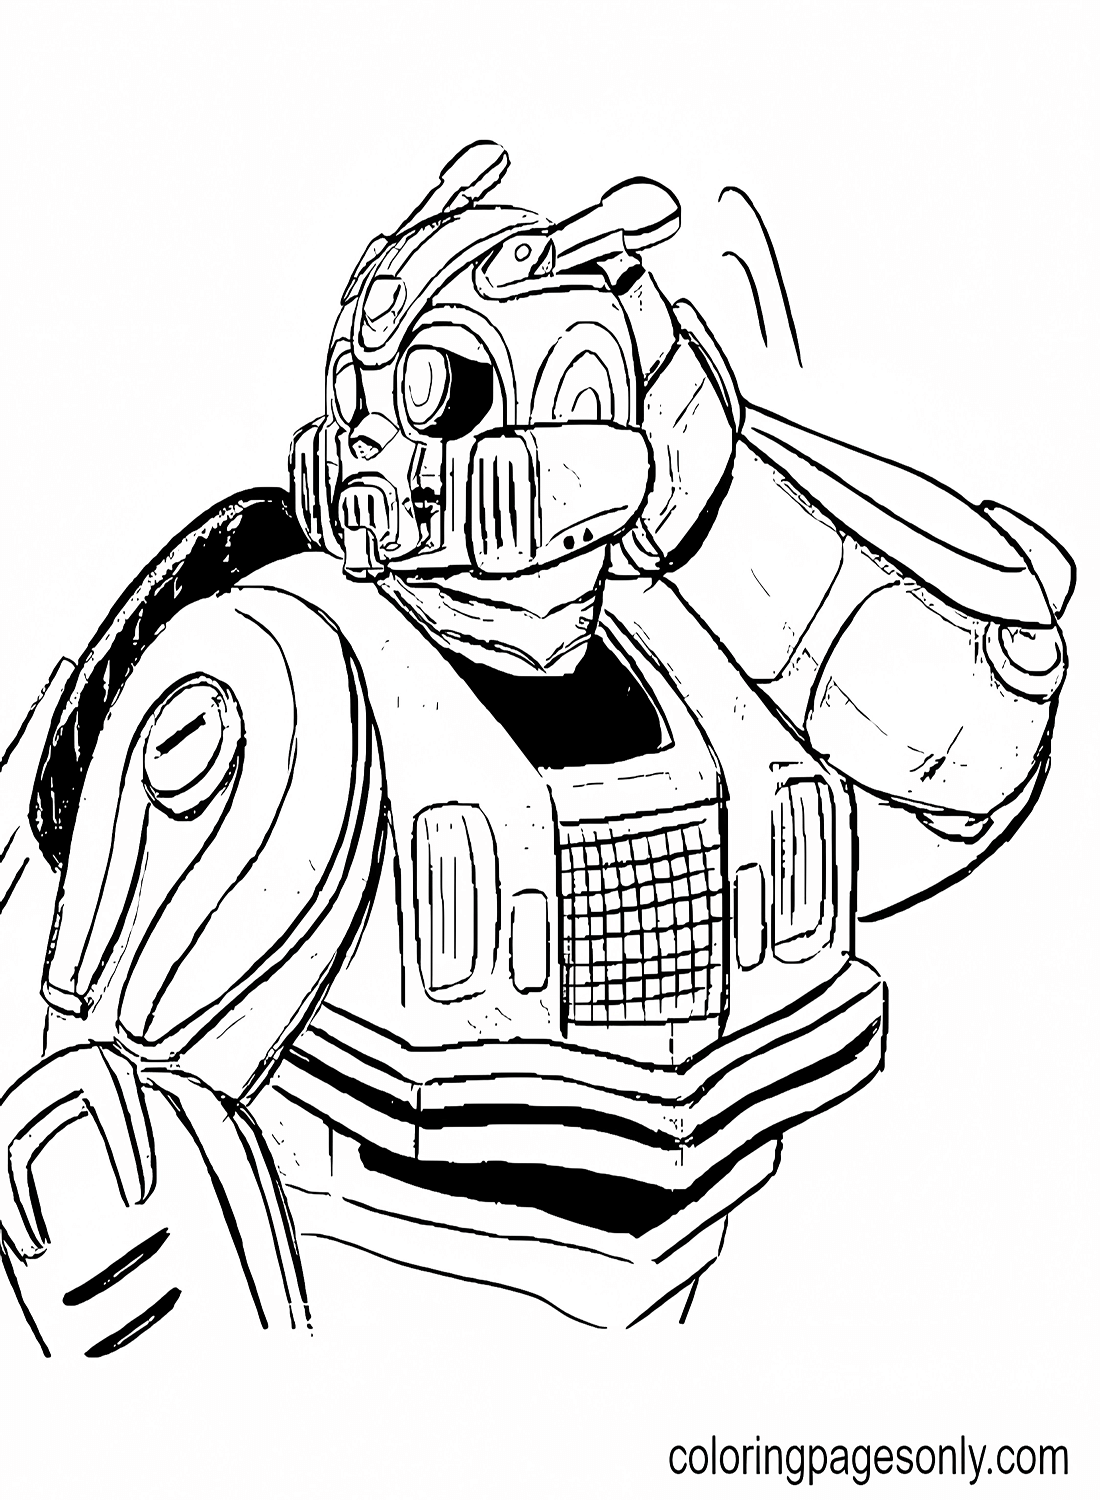 Bumblebee Cartoon Coloring Pages